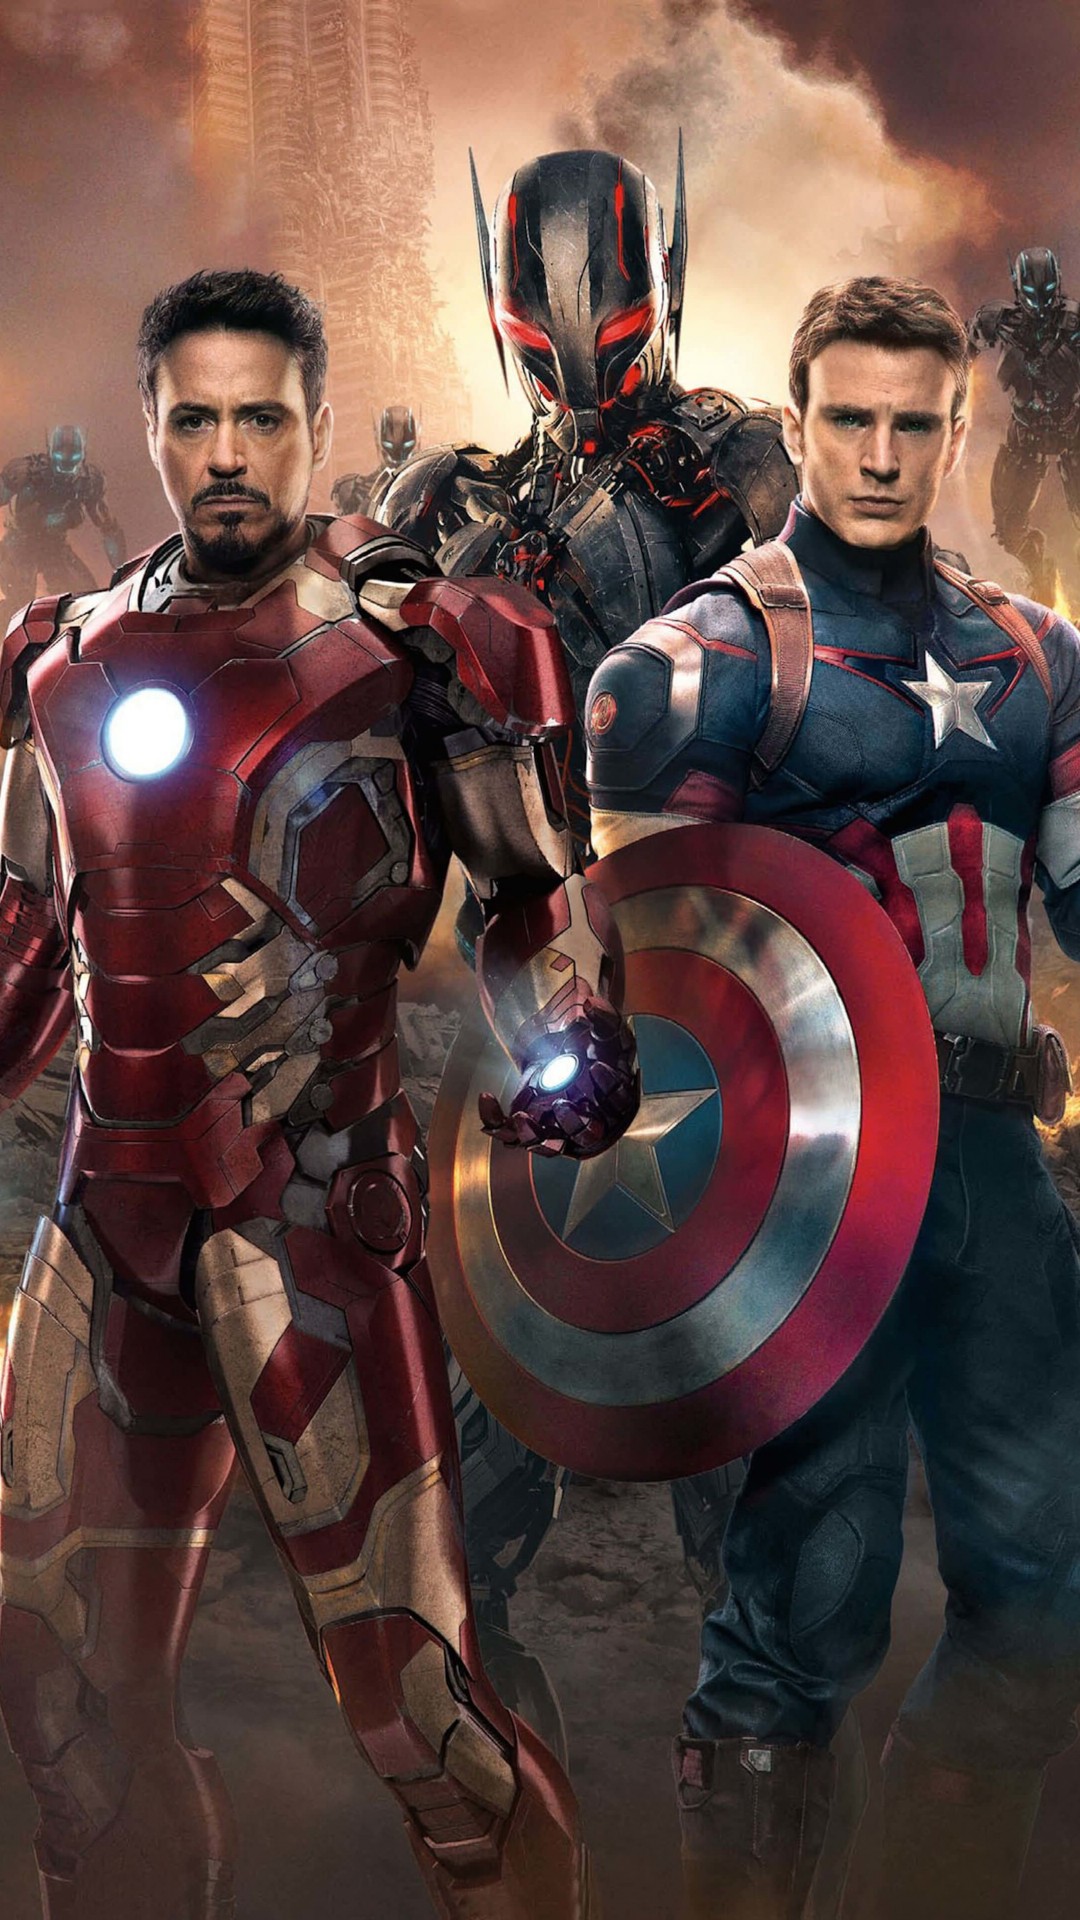 The Avengers: Age of Ultron - Iron Man and Captain America Wallpaper for SAMSUNG Galaxy S5